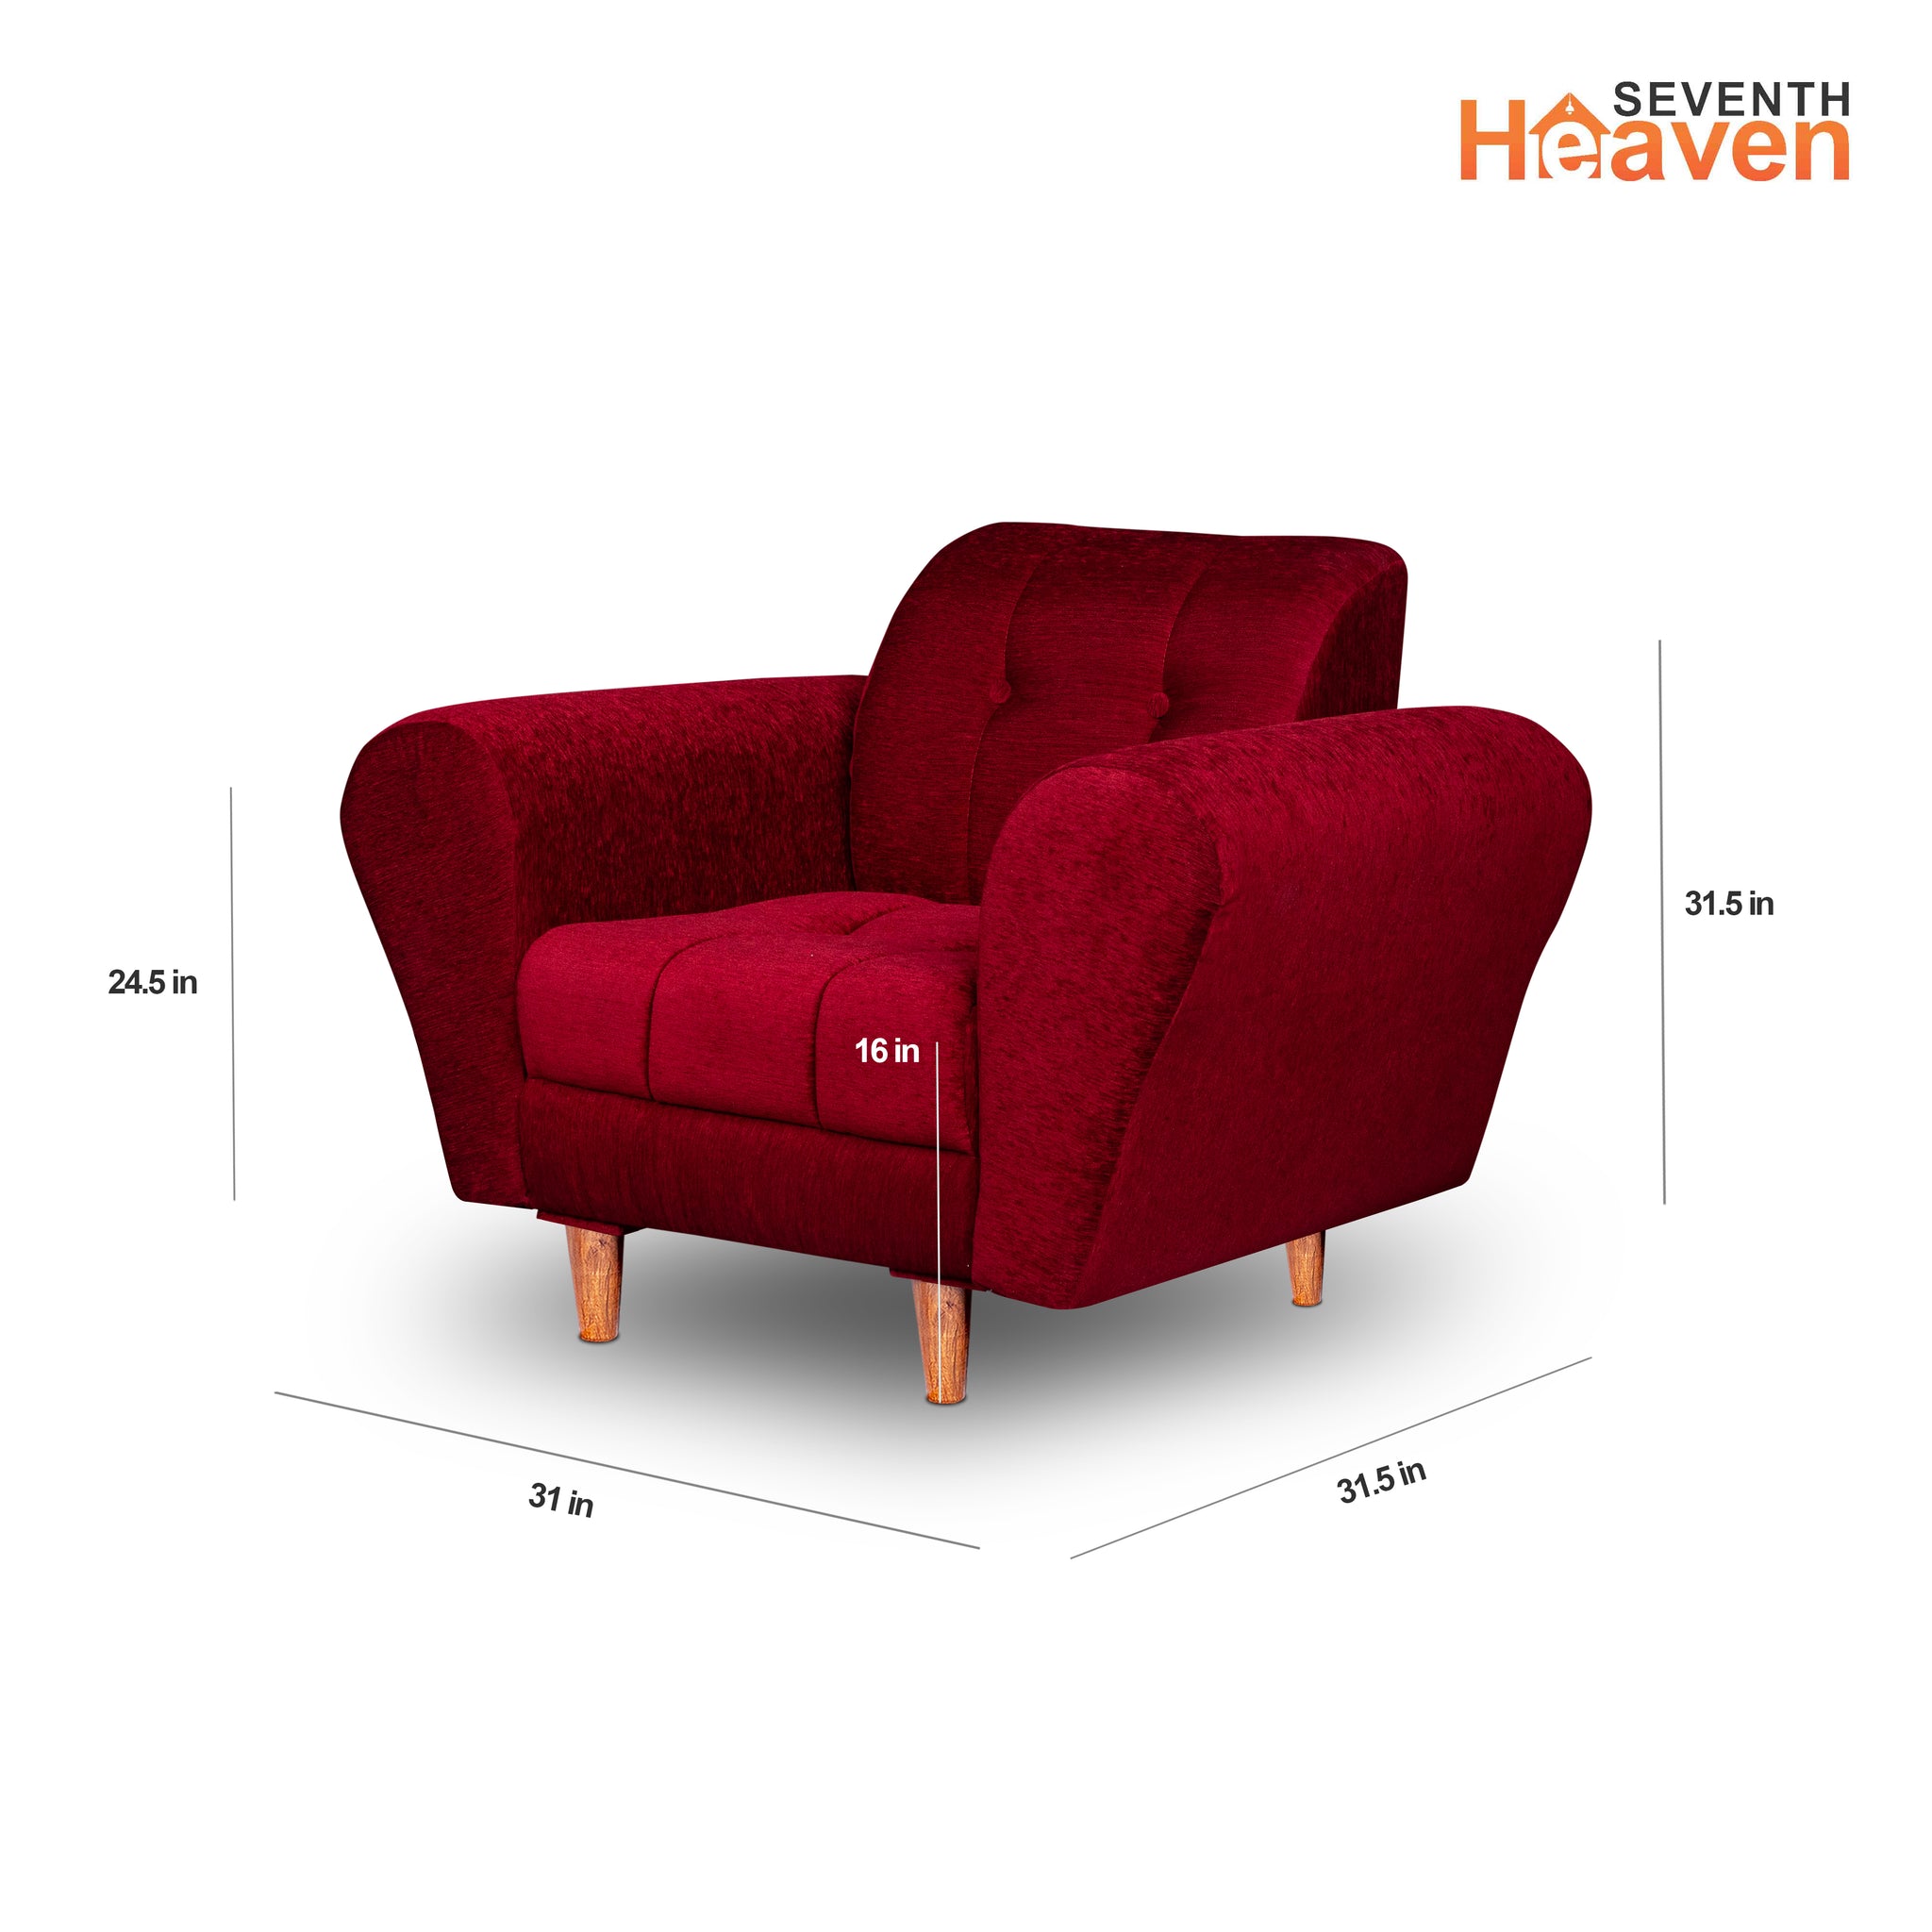 Seventh Heaven Milan 1 Seater Wooden Sofa Set Modern & Elegant Smart Furniture Range for luxurious homes, living rooms and offices. Maroon Colour Molphino fabric with sheesham polished wooden legs. Product dimensions are also mentioned.